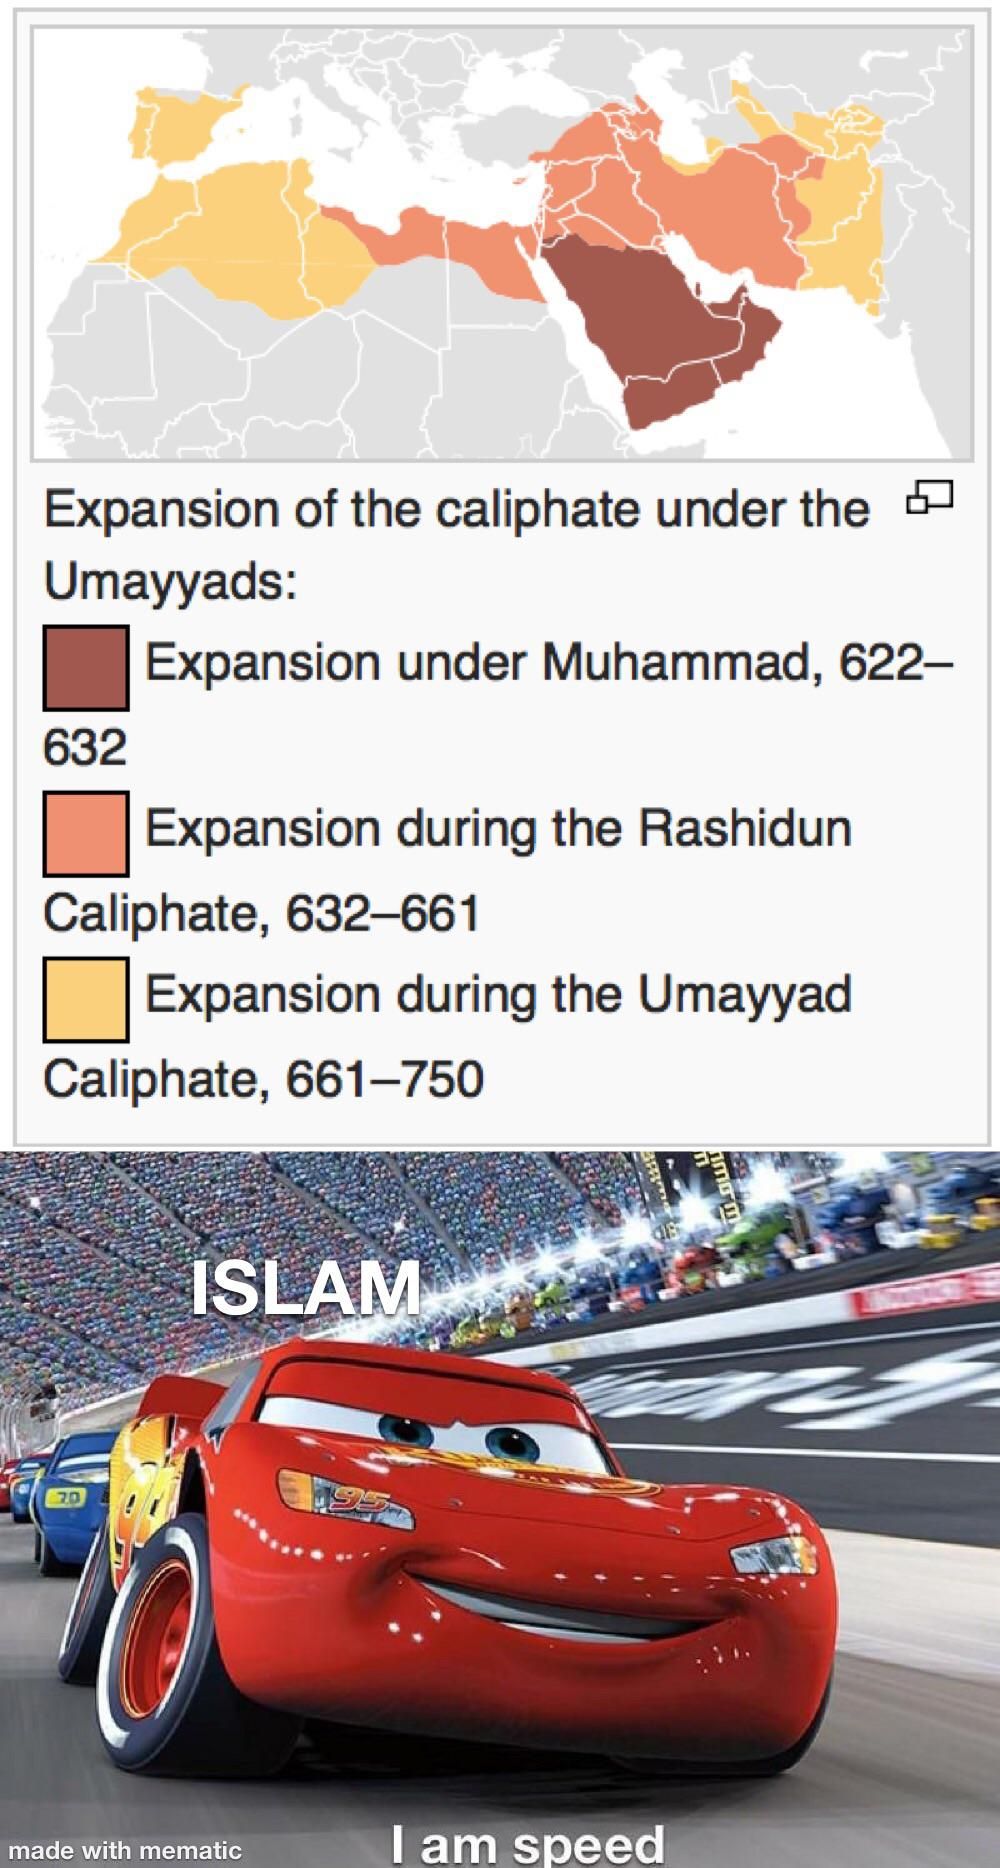 In the space of only 130 years Islam spread rapidly